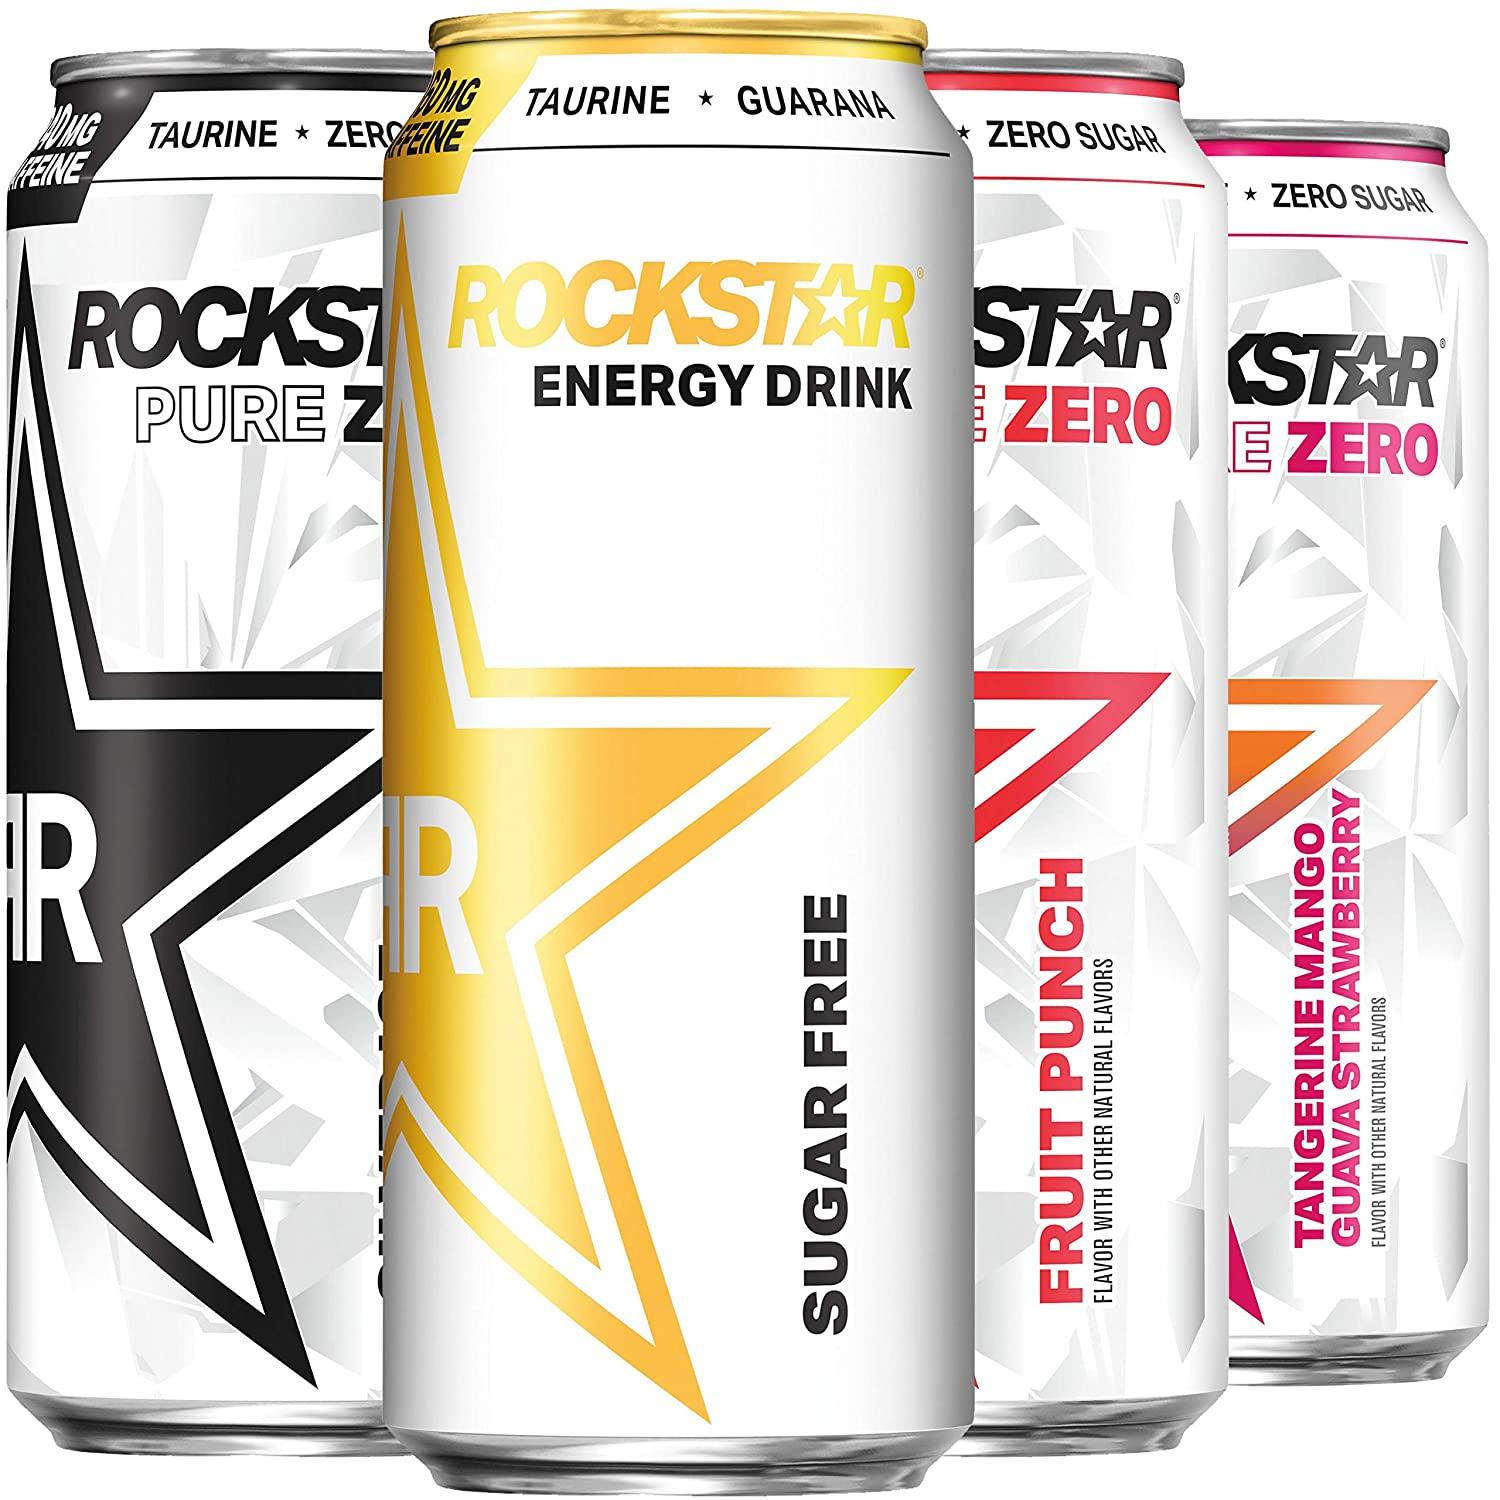 12 Rockstar Pure Zero Variety Energy Drink for $13.65 Shipped